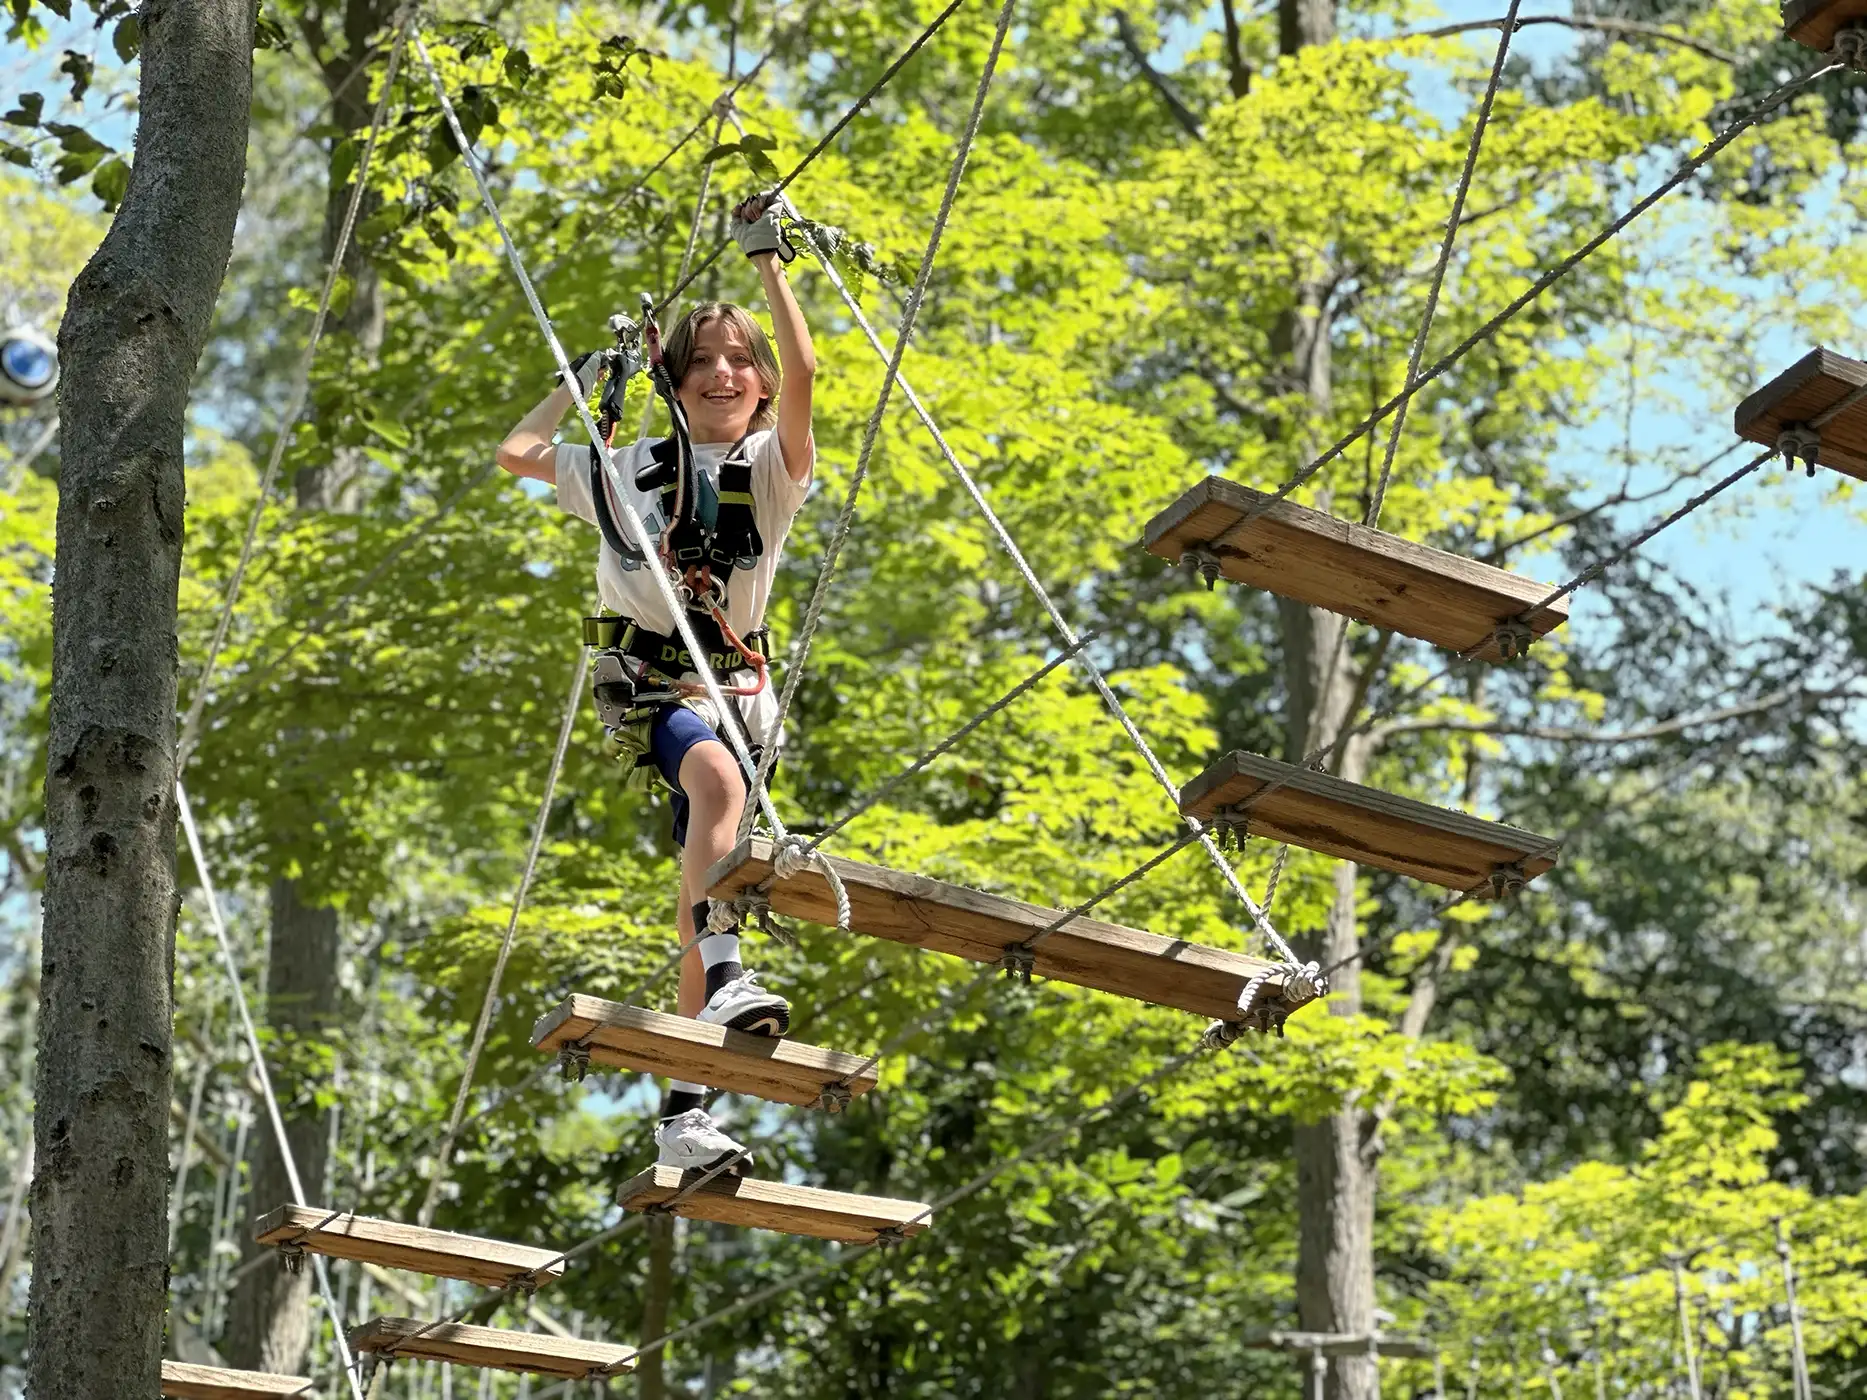 Child enjoying obstacle course in the tree tops.